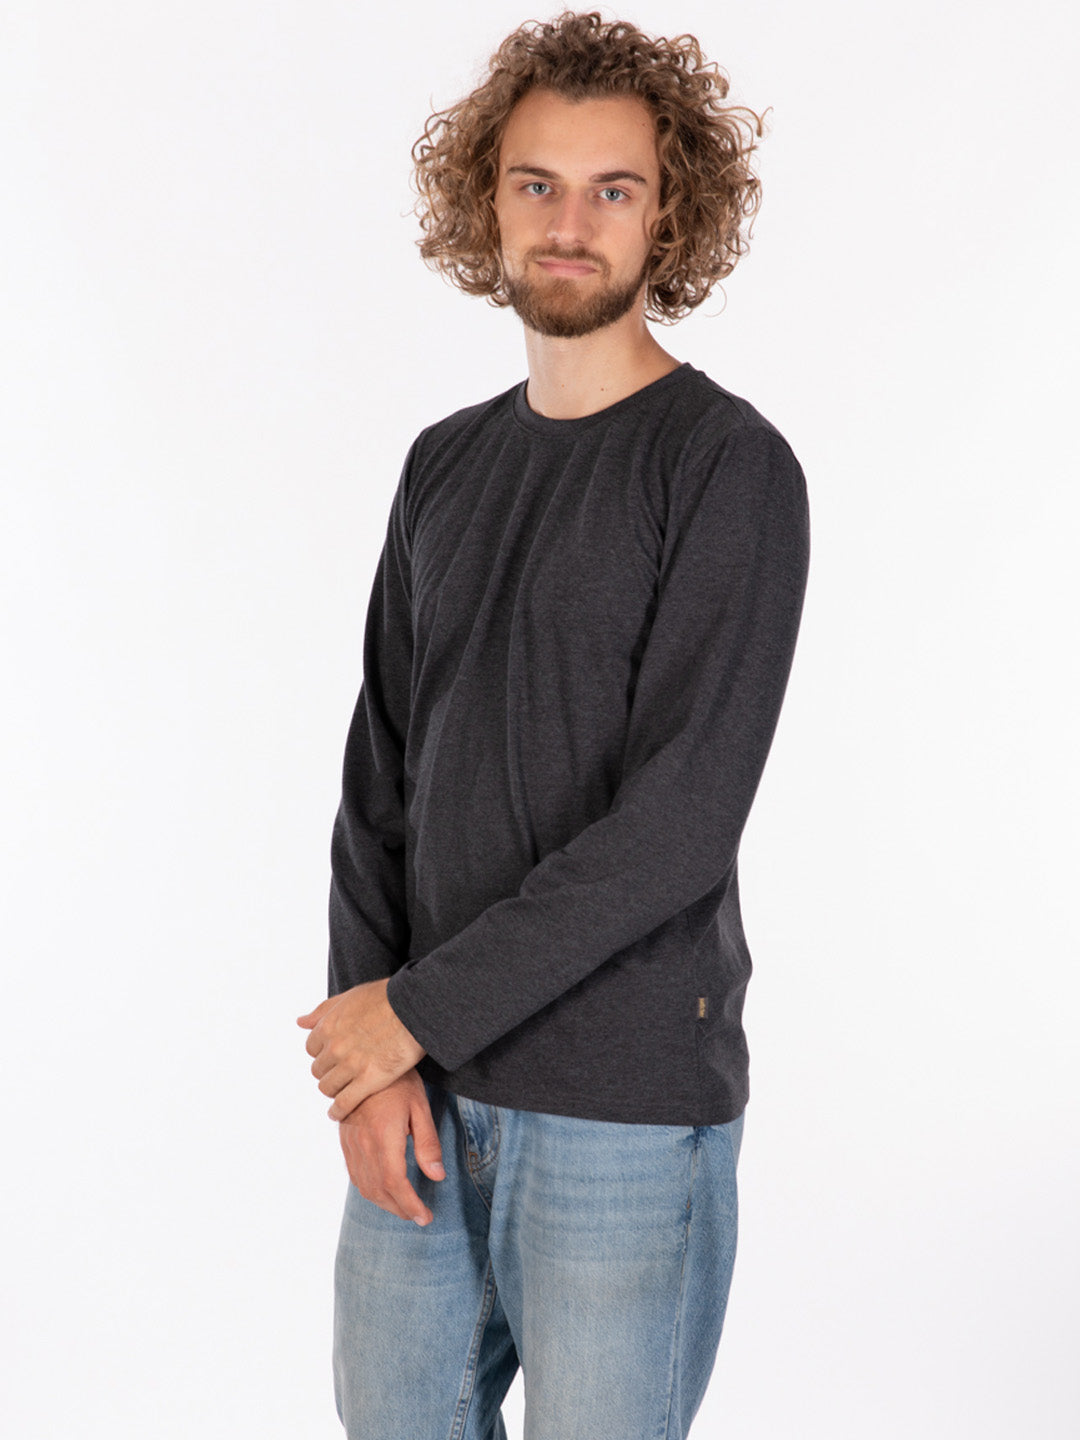 Recycled long-sleeved T-shirt Loic 2830